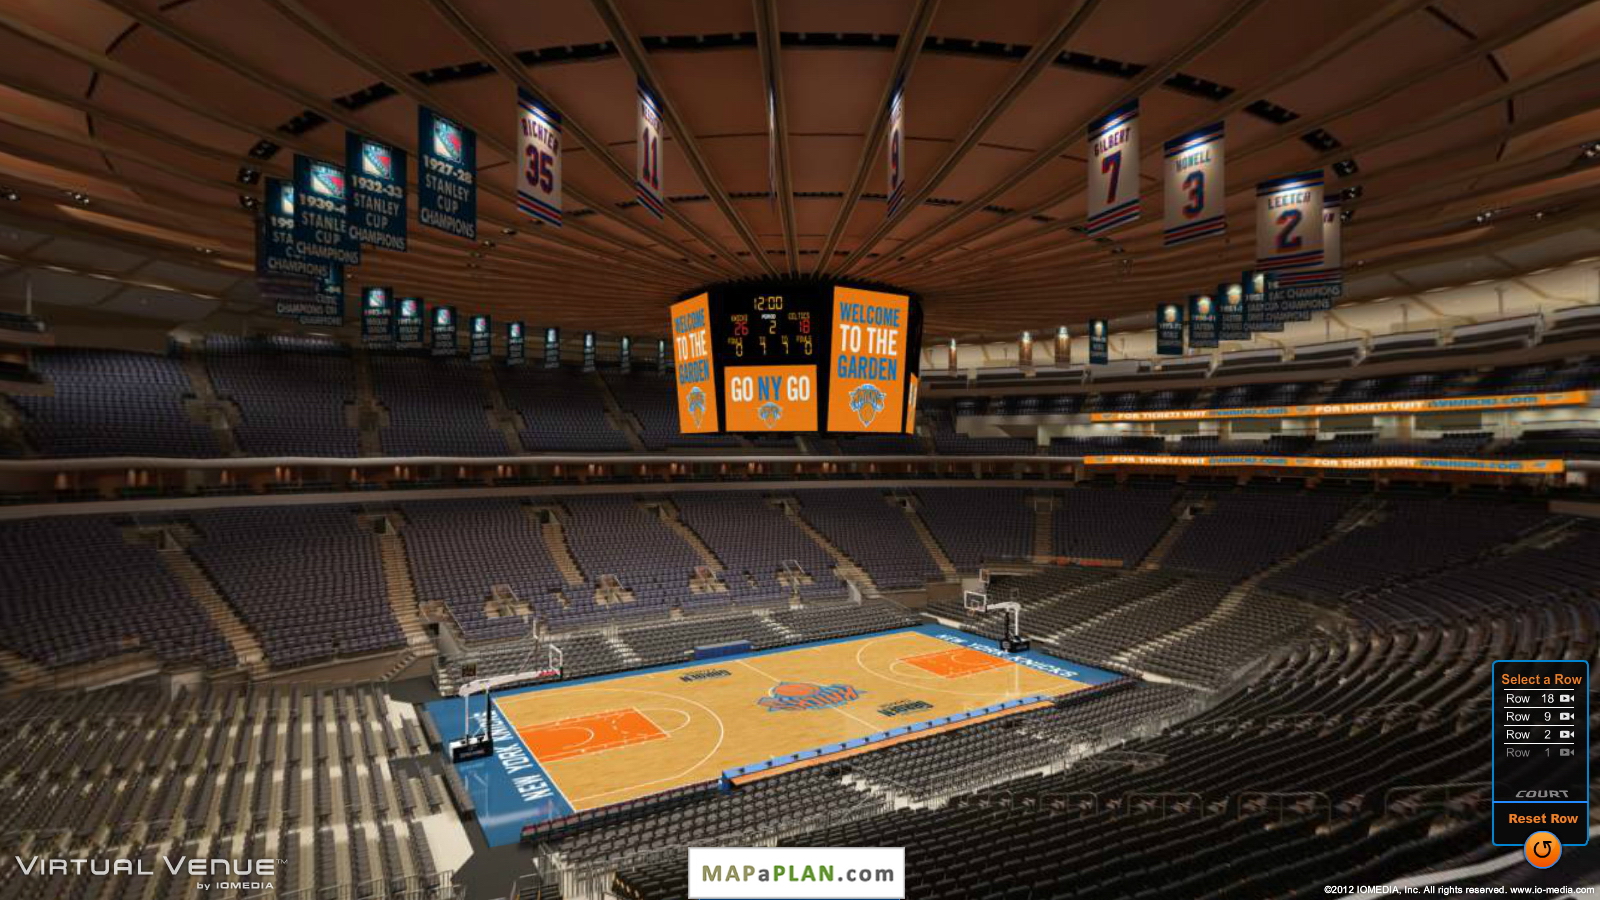 Madison square garden seating chart View from section 209